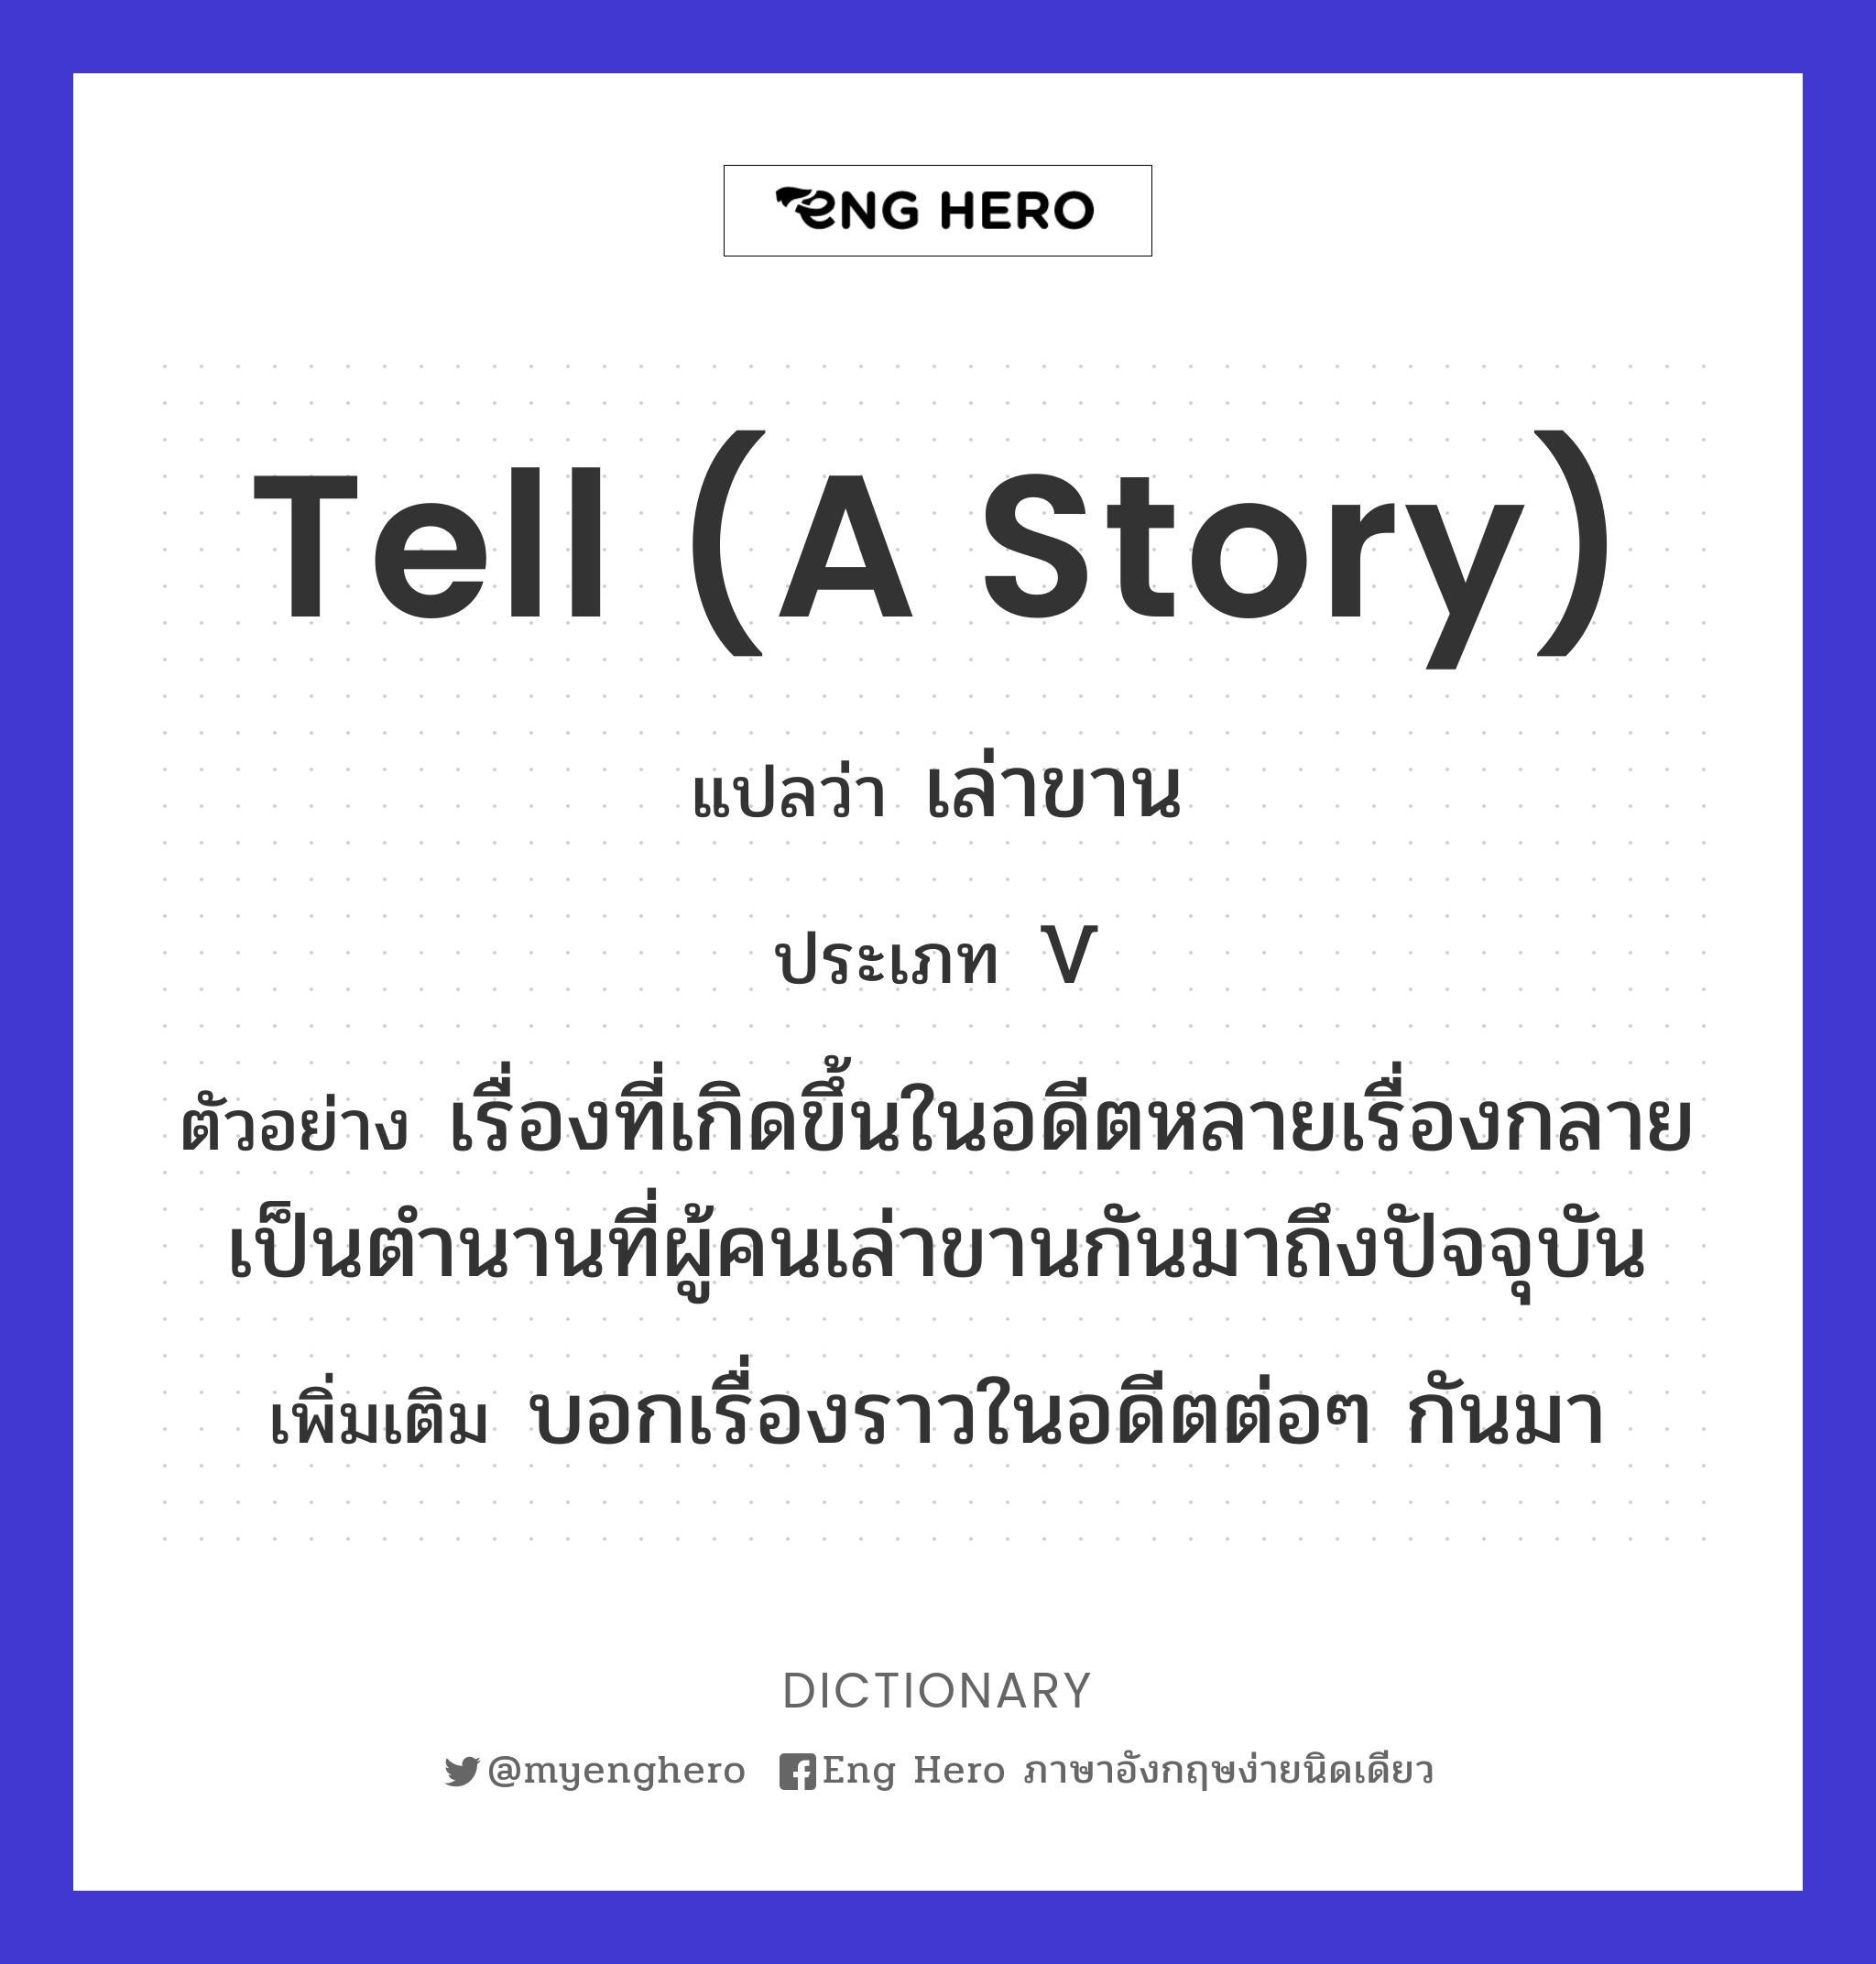 tell (a story)